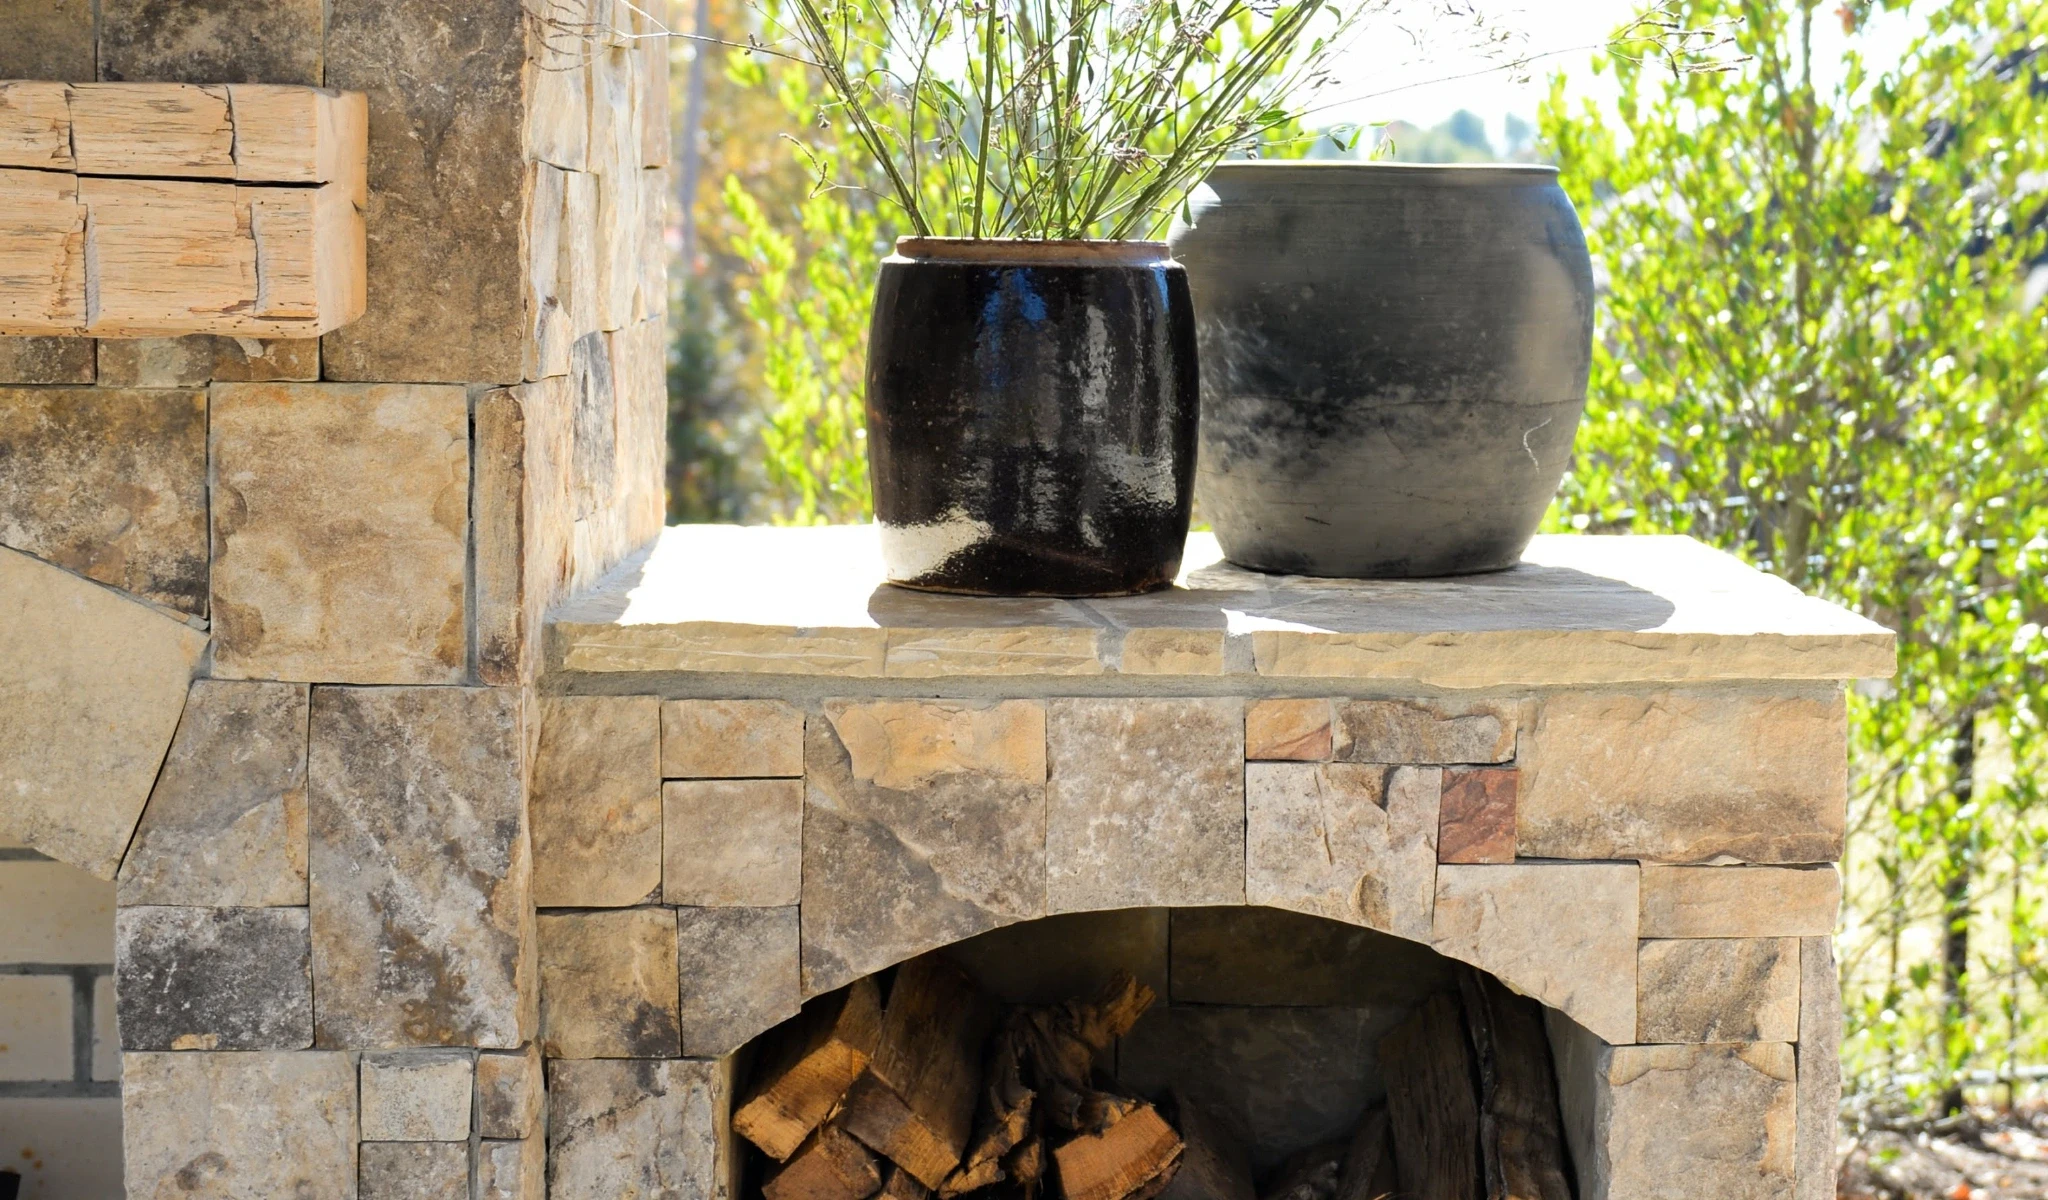 A stone fireplace with two vases on top in a new home construction.